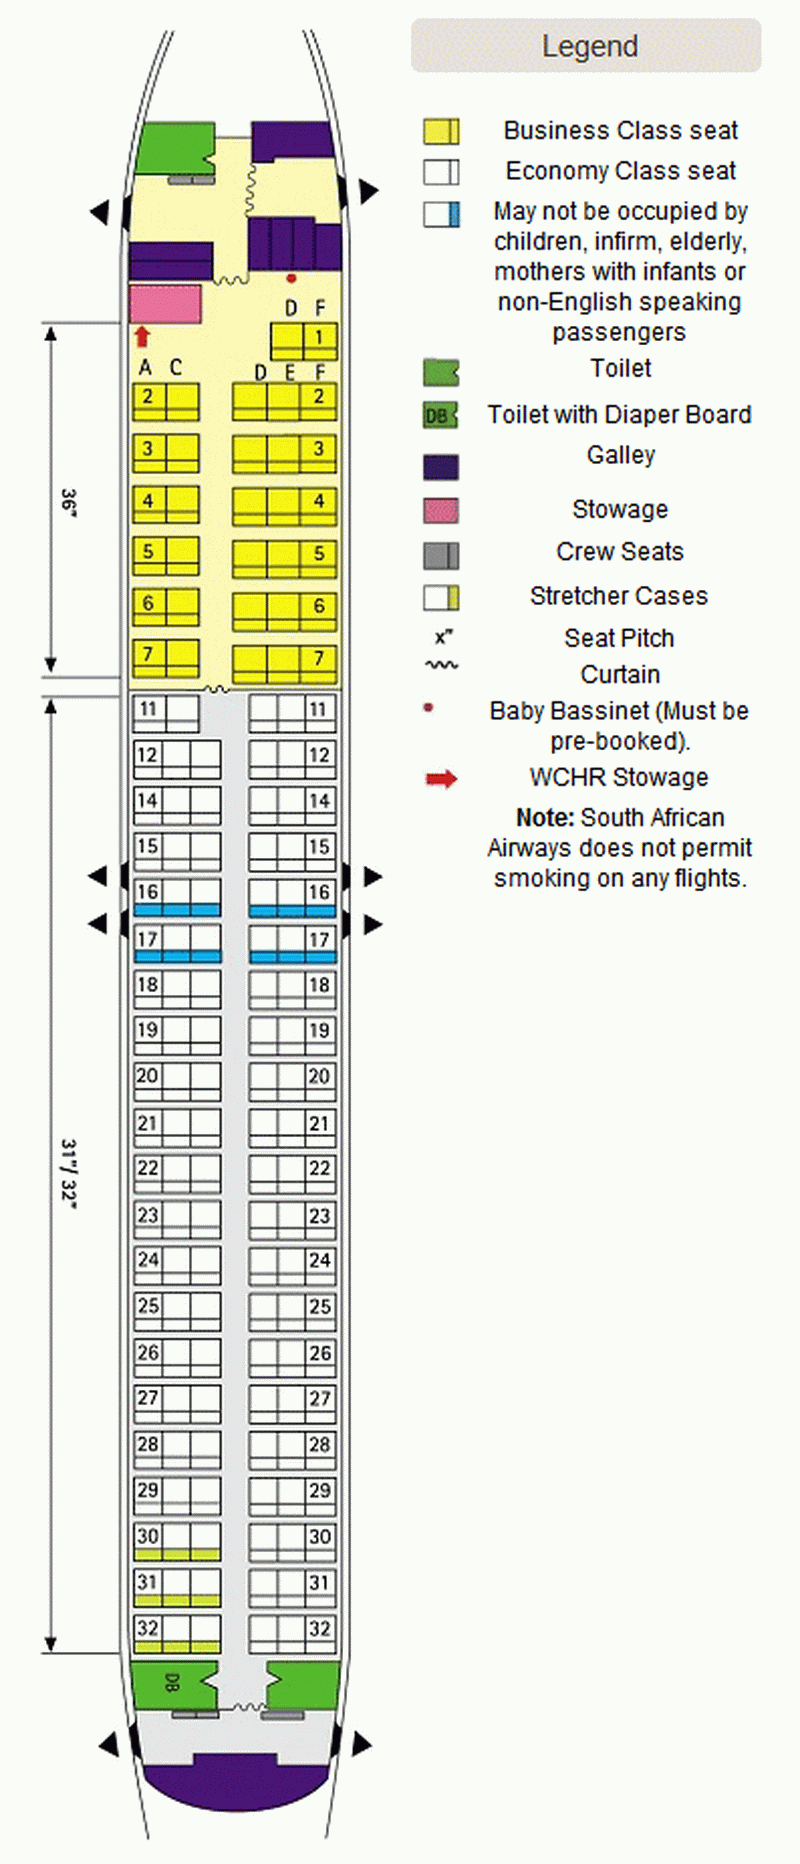 SOUTH AFRICAN AIRWAYS BOEING 737-800 AIRCRAFT SEATING CHART